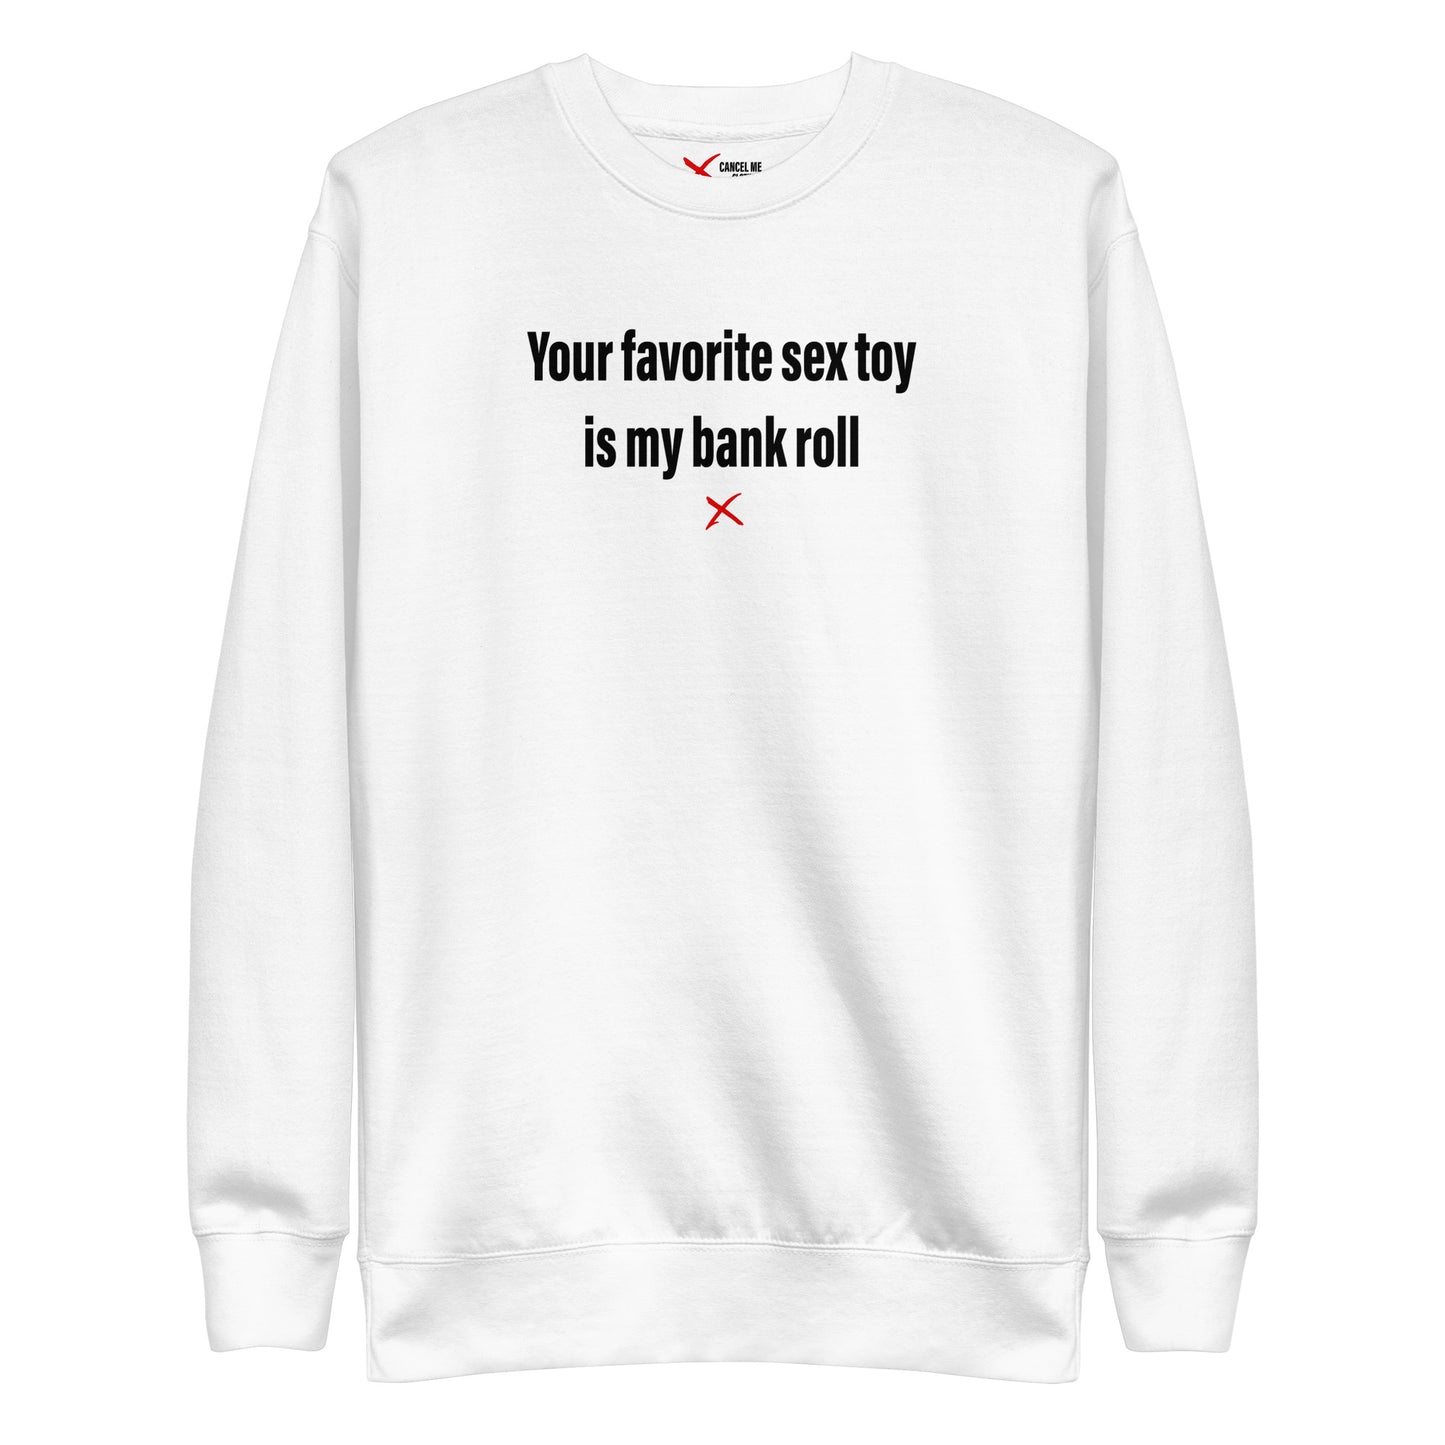 Your favorite sex toy is my bank roll - Sweatshirt